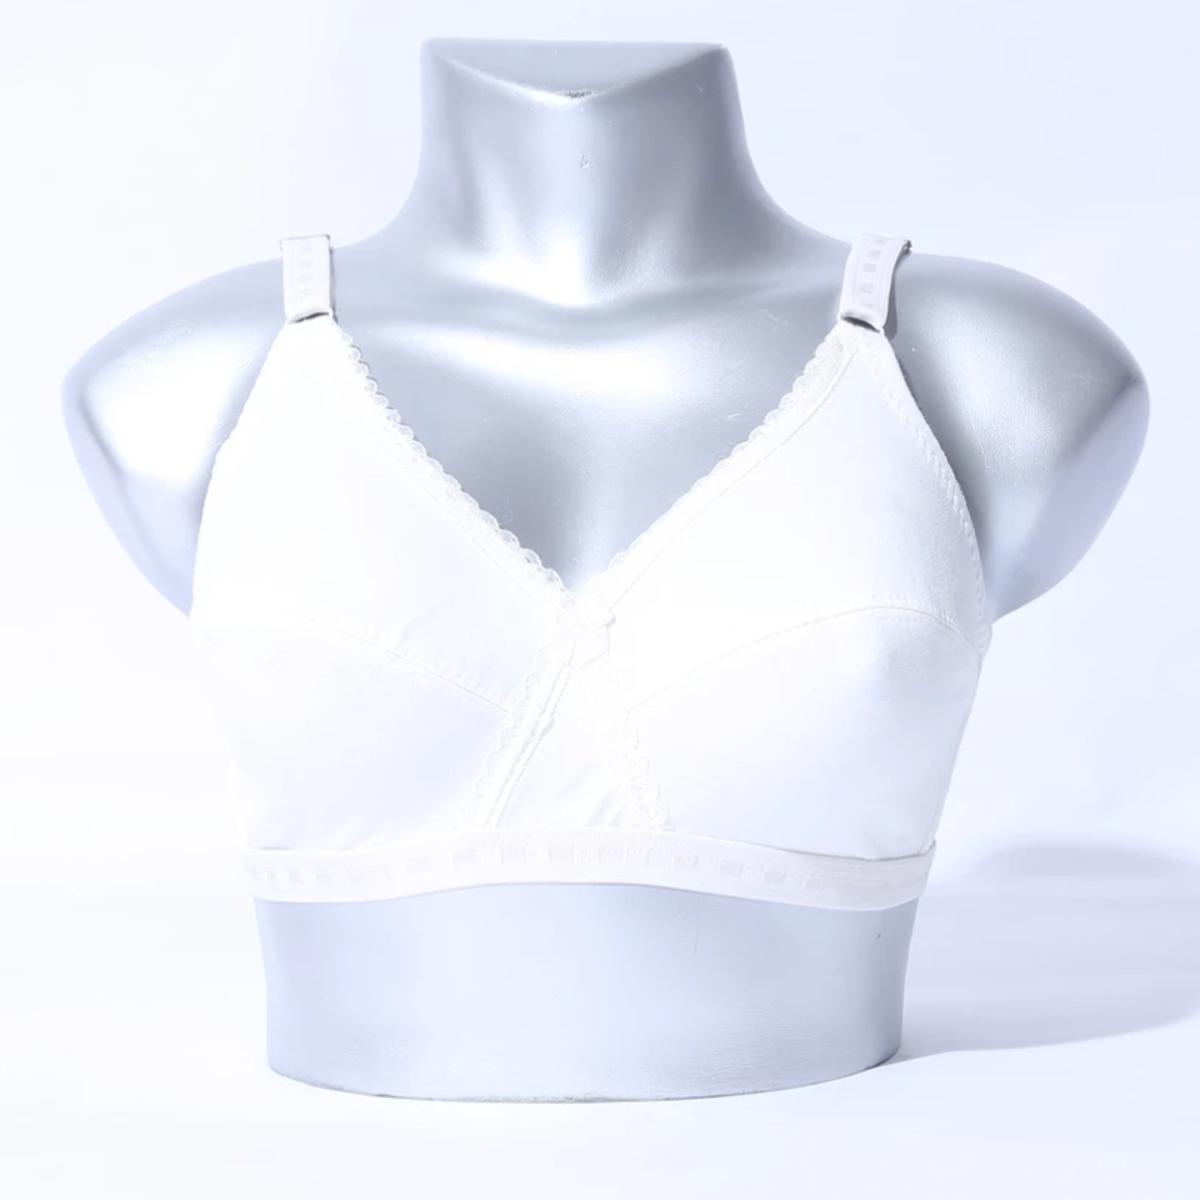 Cotton Bra for Women Non-Padded, Non-Wired & Full Coverage with Seamless  Cup - GALAXYSHOPER